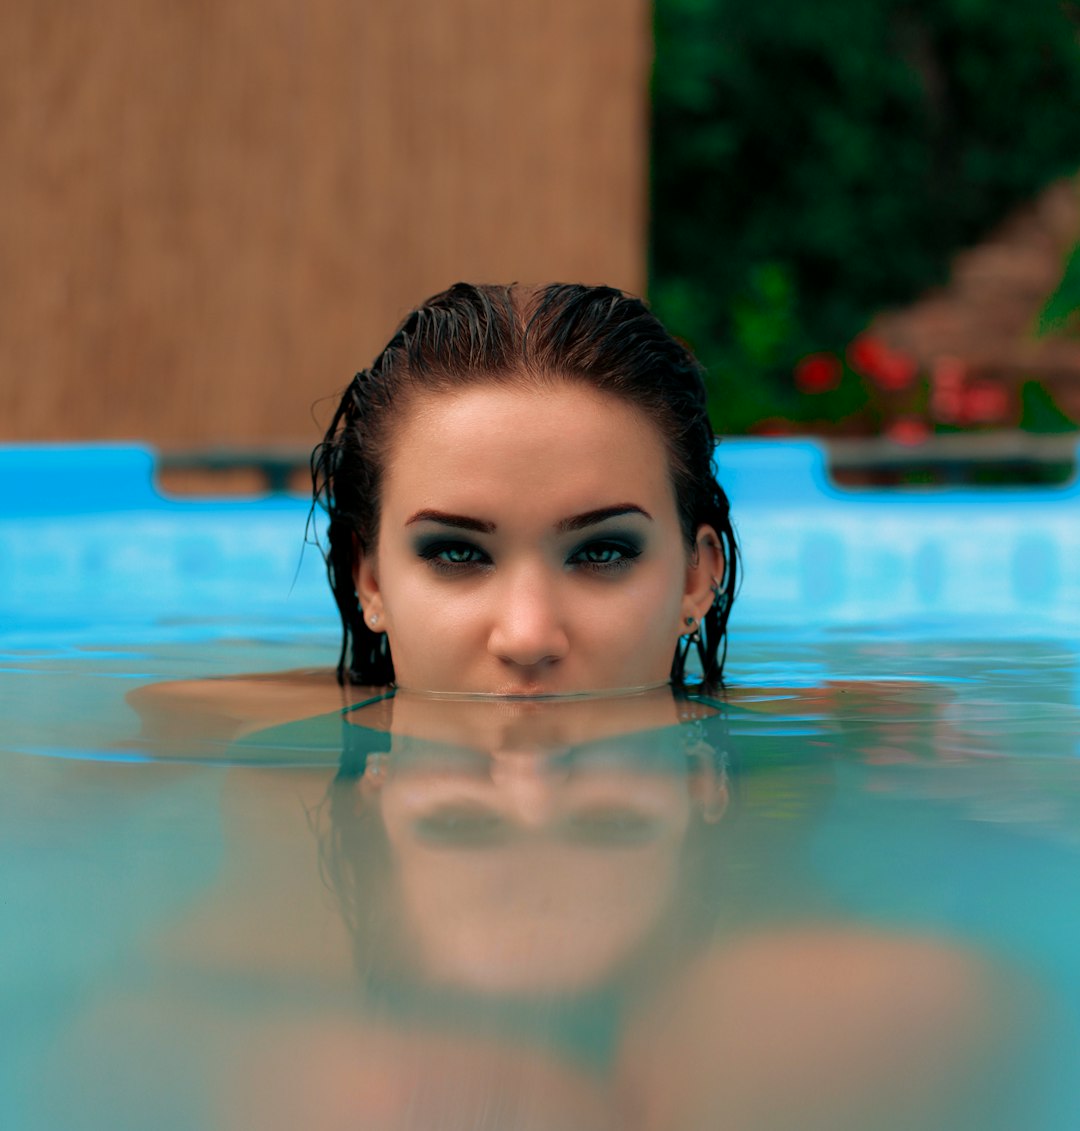 woman in swimming pool during daytime